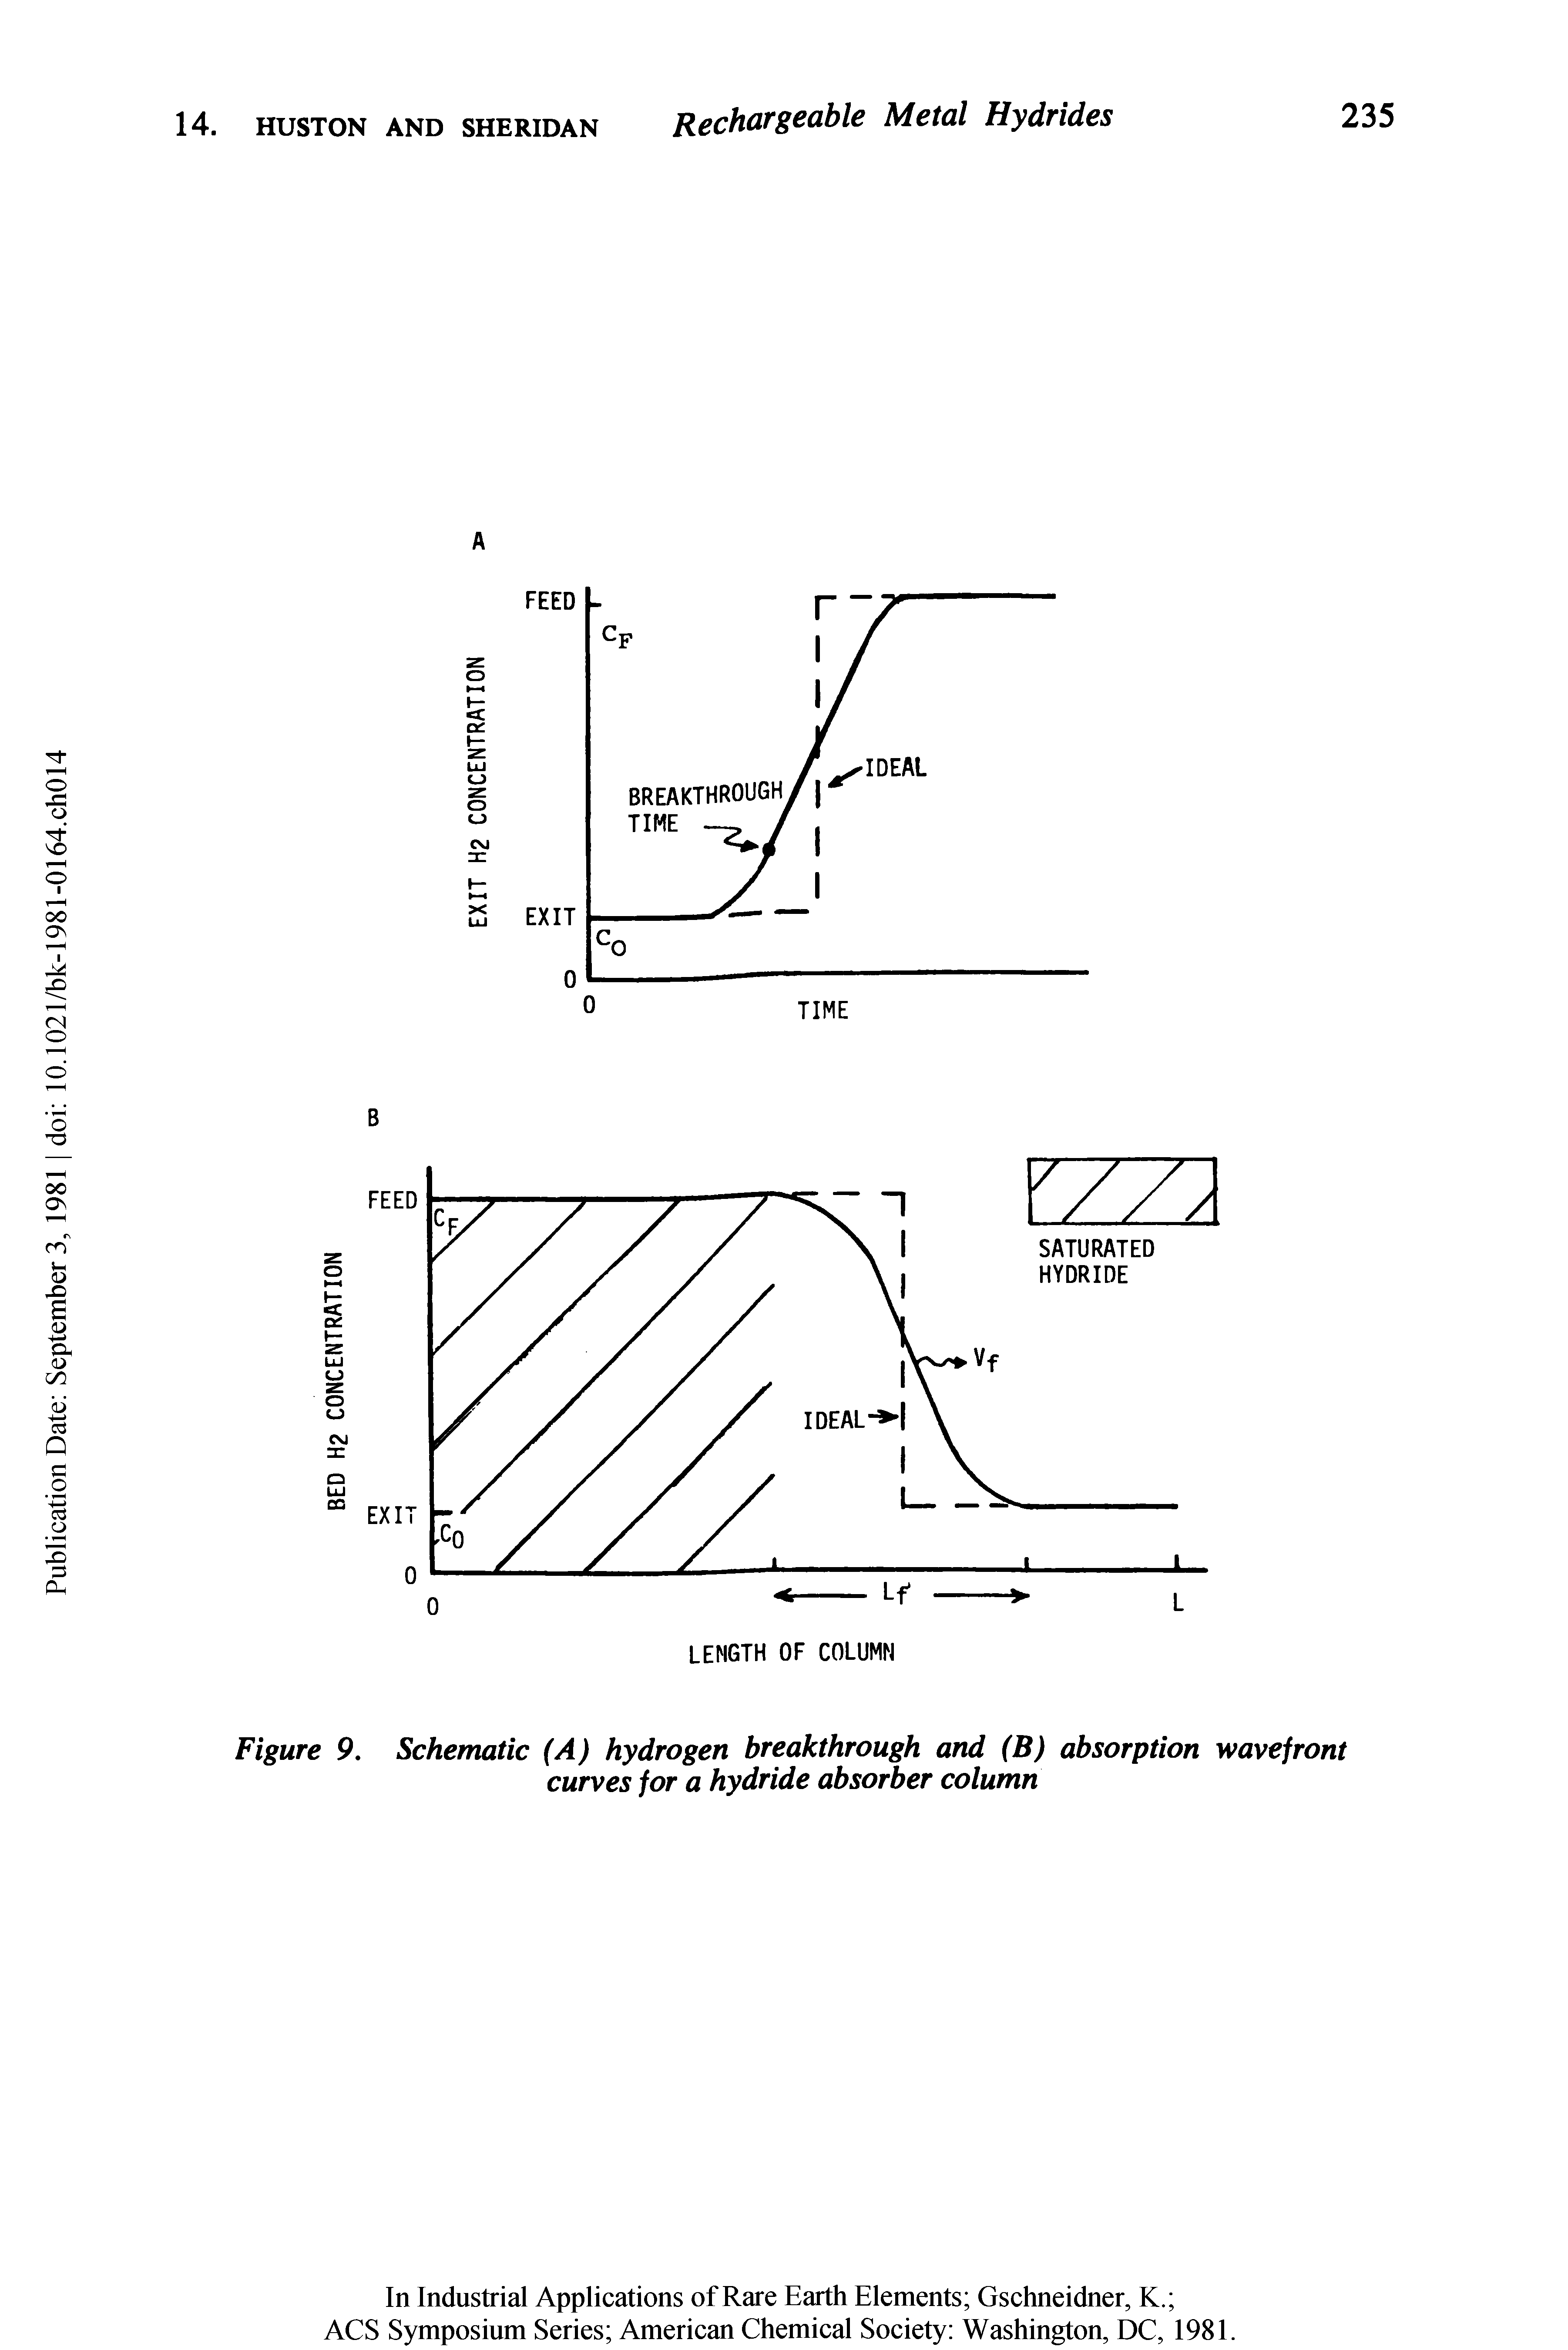 Figure 9. Schematic (A) hydrogen breakthrough and (B) absorption wavefront curves for a hydride absorber column...